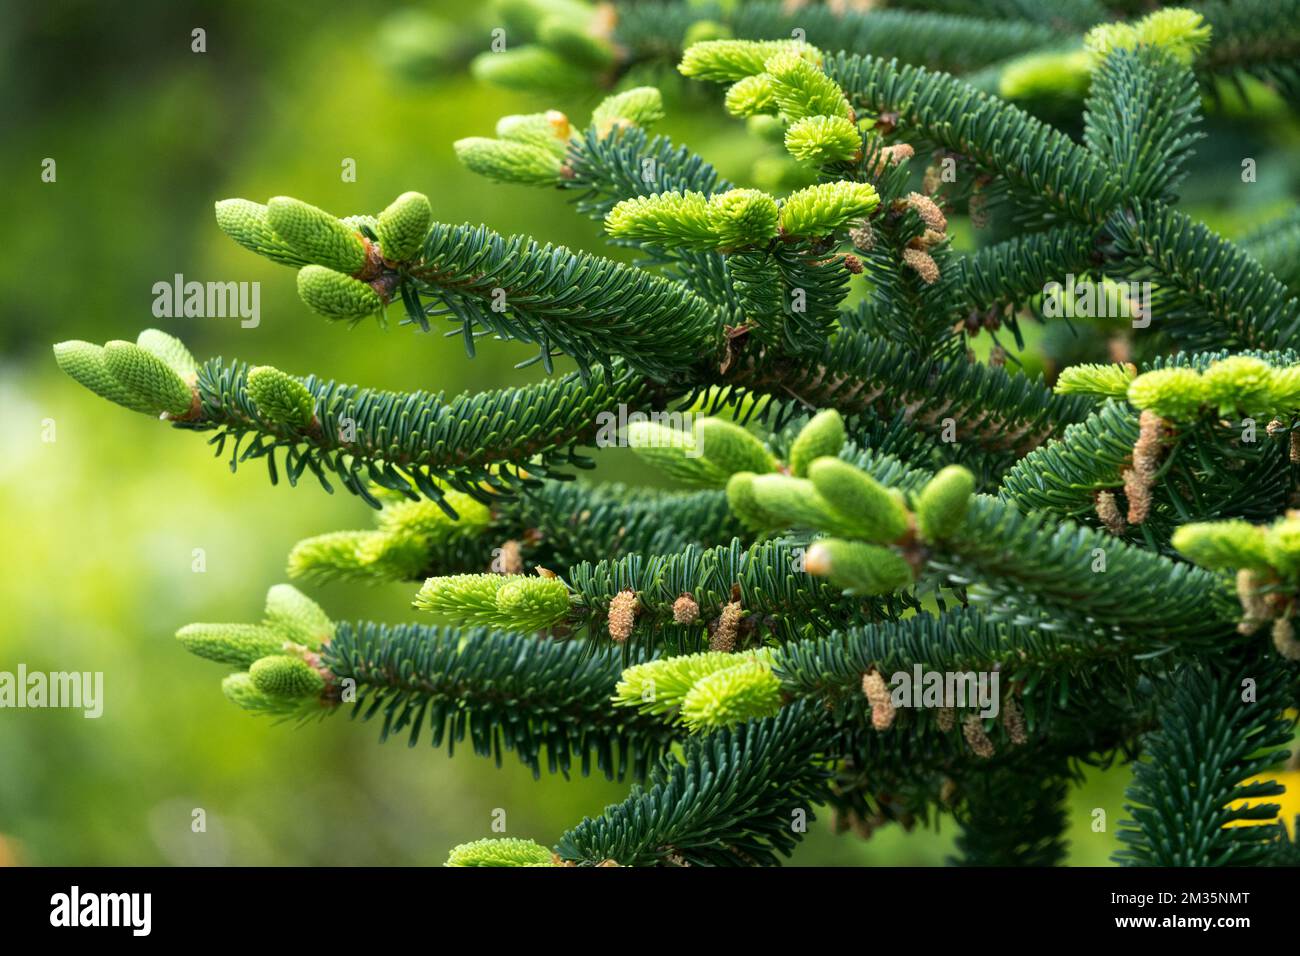 Spring, Conifer, Branches, Abies numidica, Algerian Fir Stock Photo